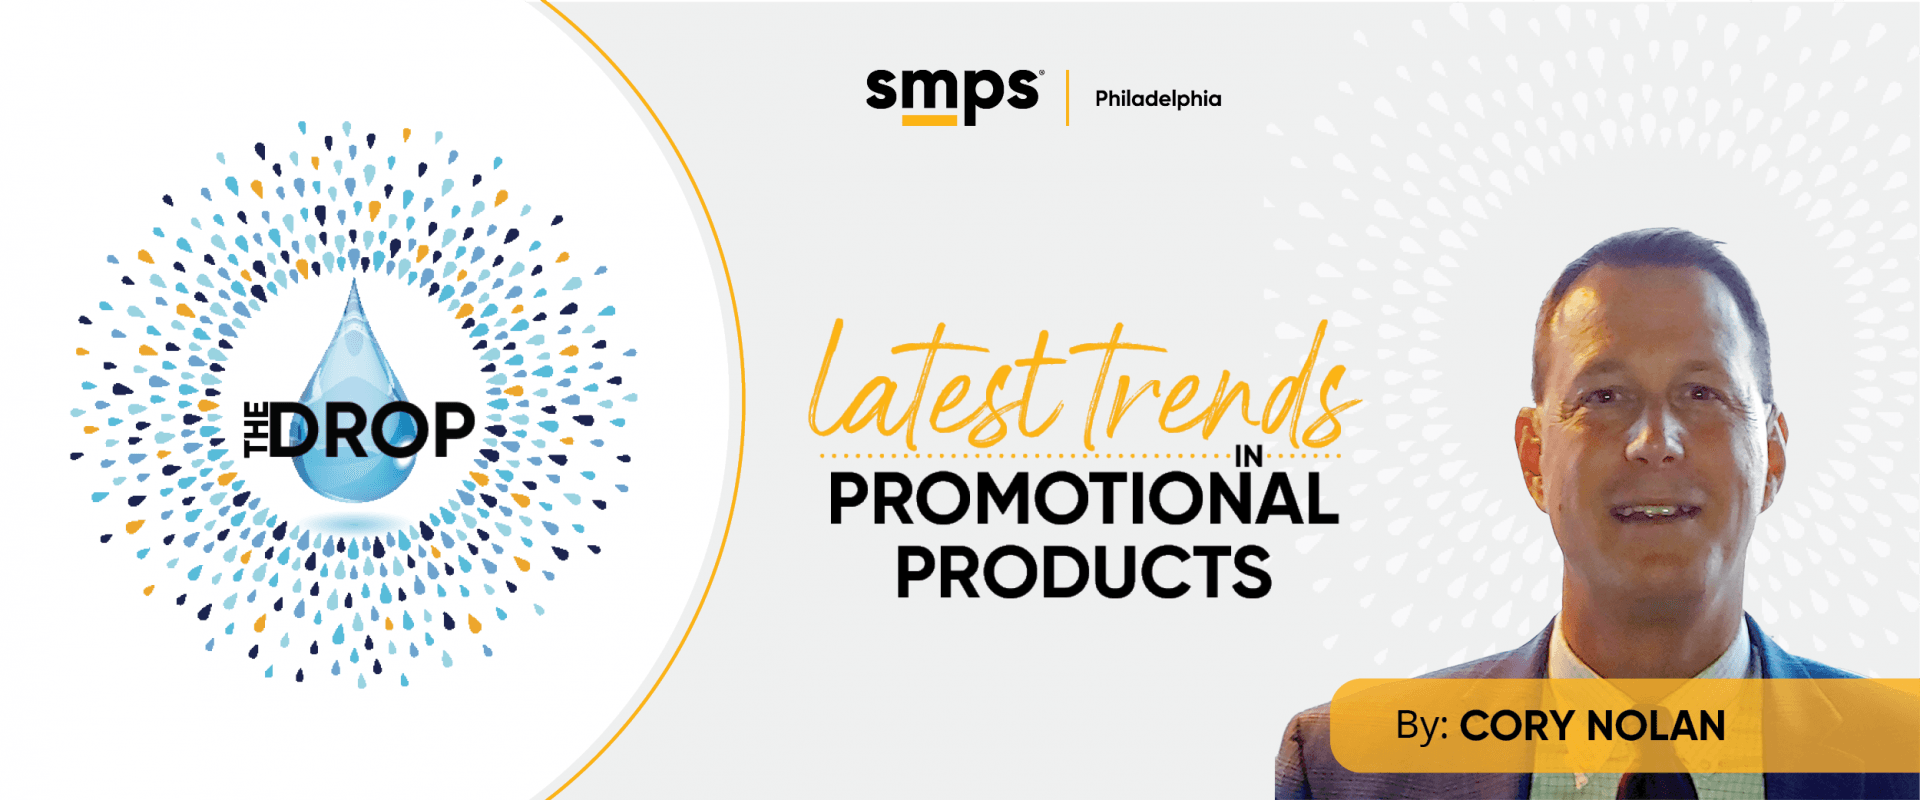 LATEST TRENDS IN PROMOTIONAL PRODUCTS